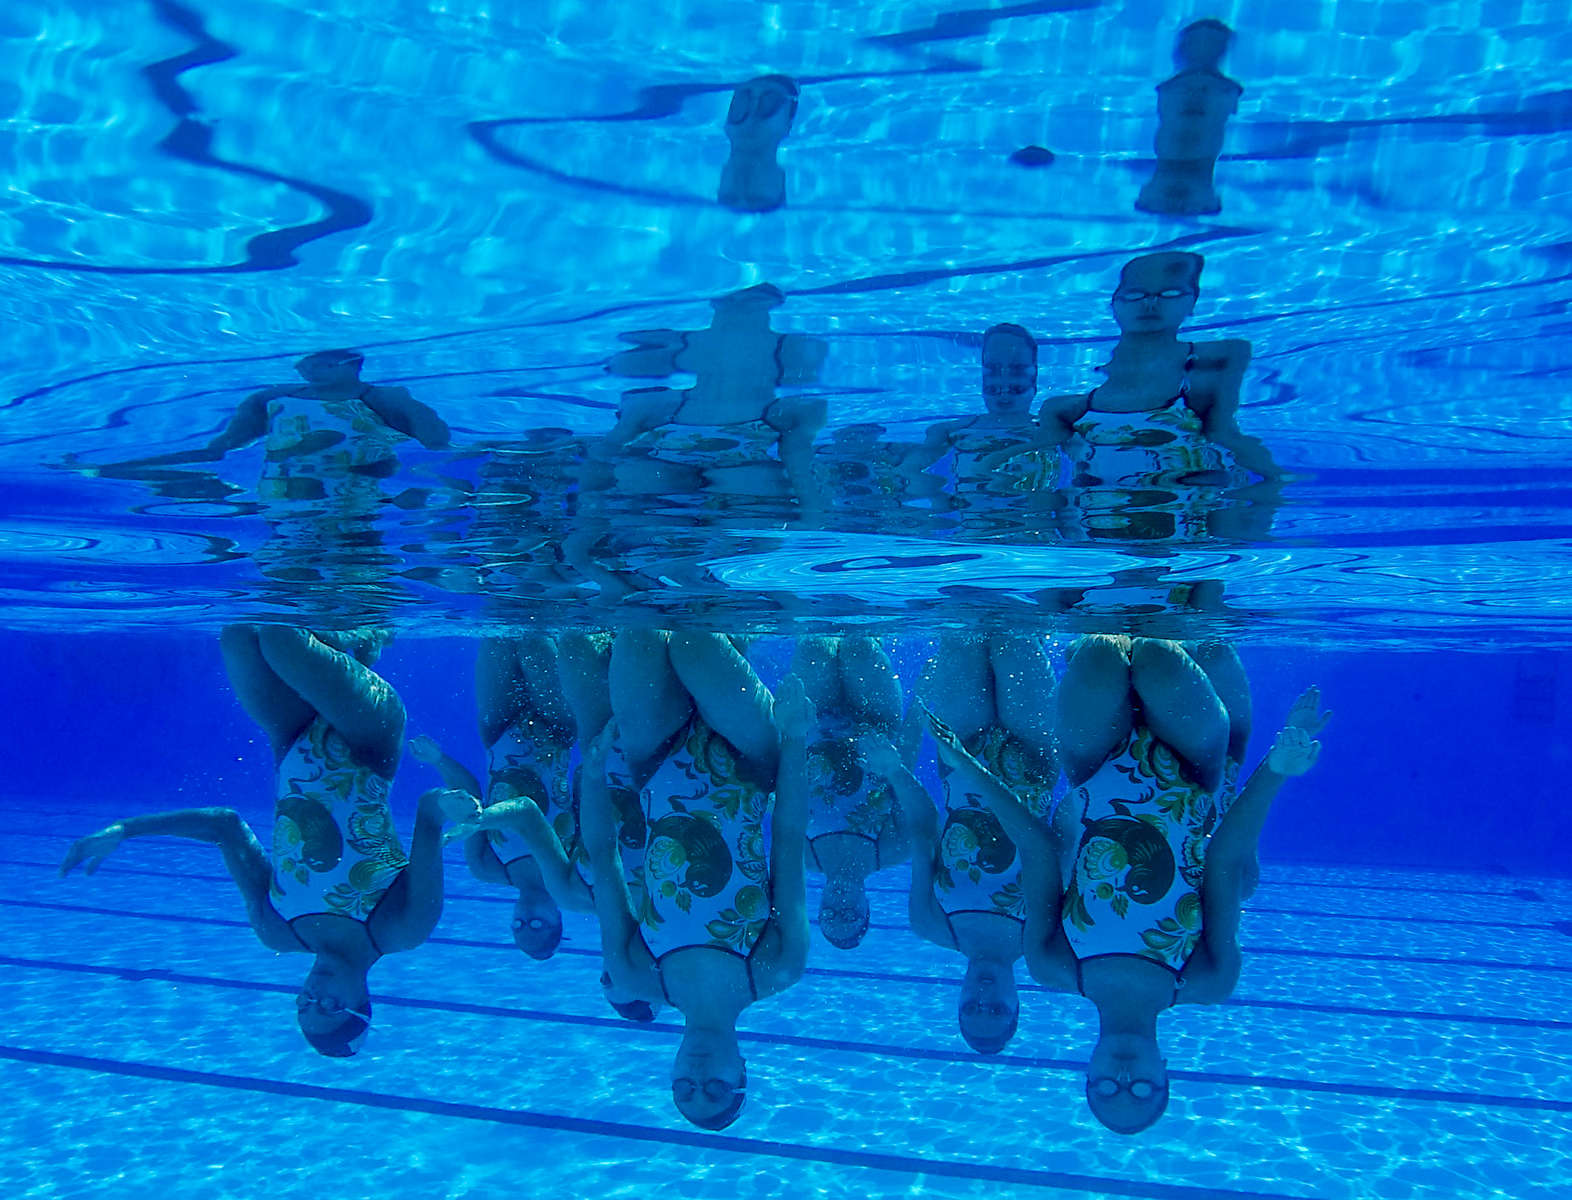 The American team practices during the FINA World championships in Budapest, Hungary on July 20, 2017.